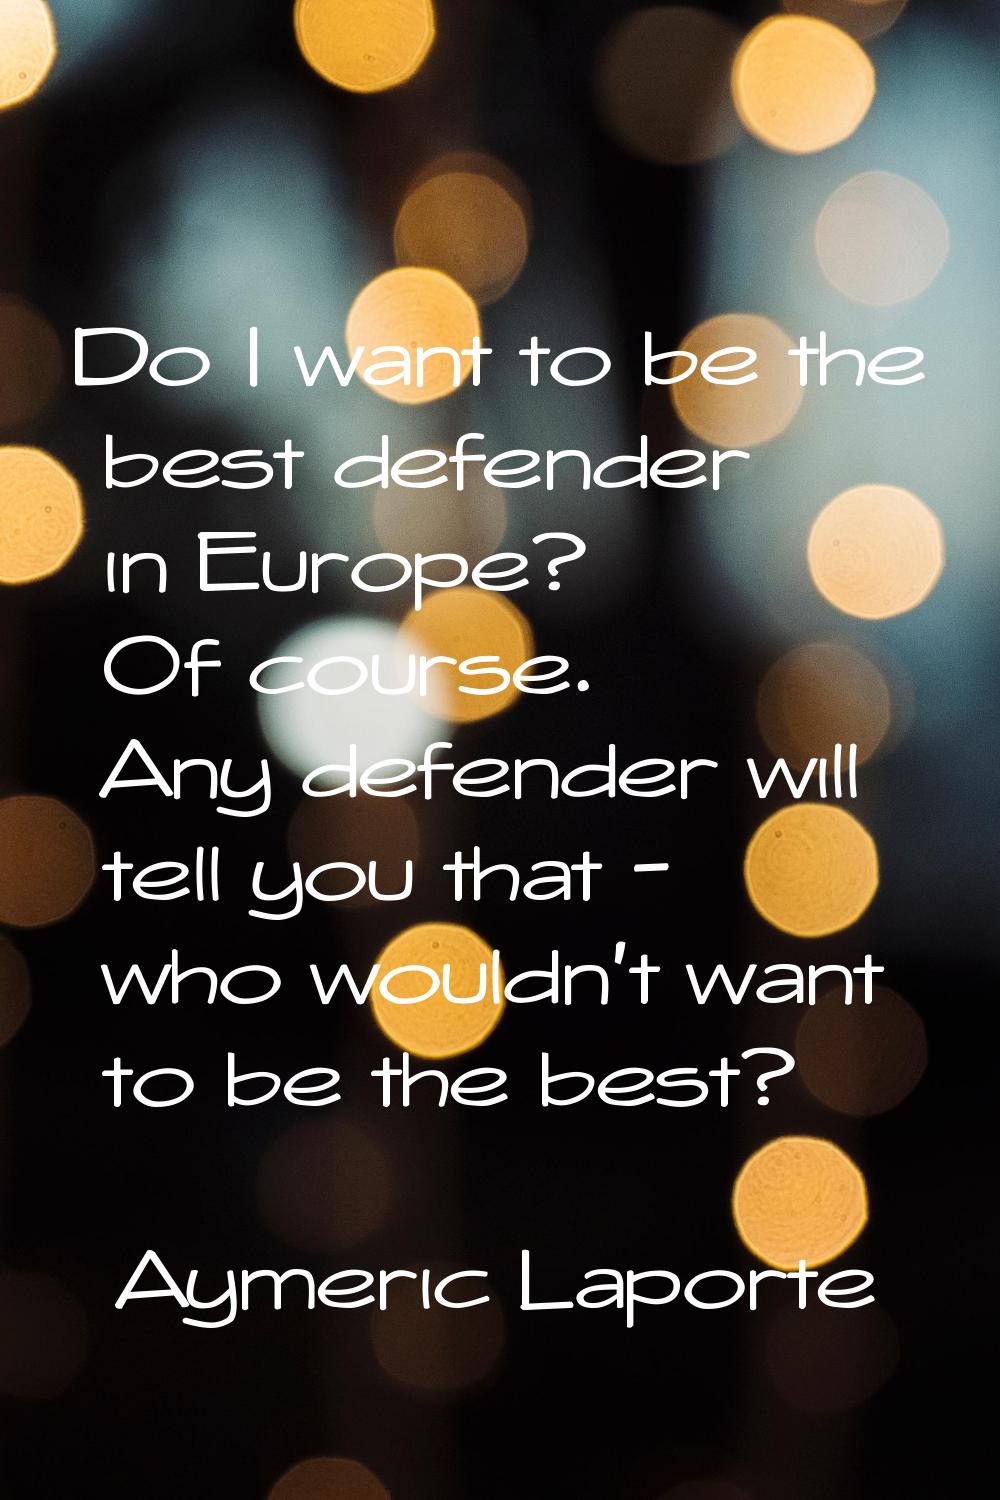 Do I want to be the best defender in Europe? Of course. Any defender will tell you that - who would